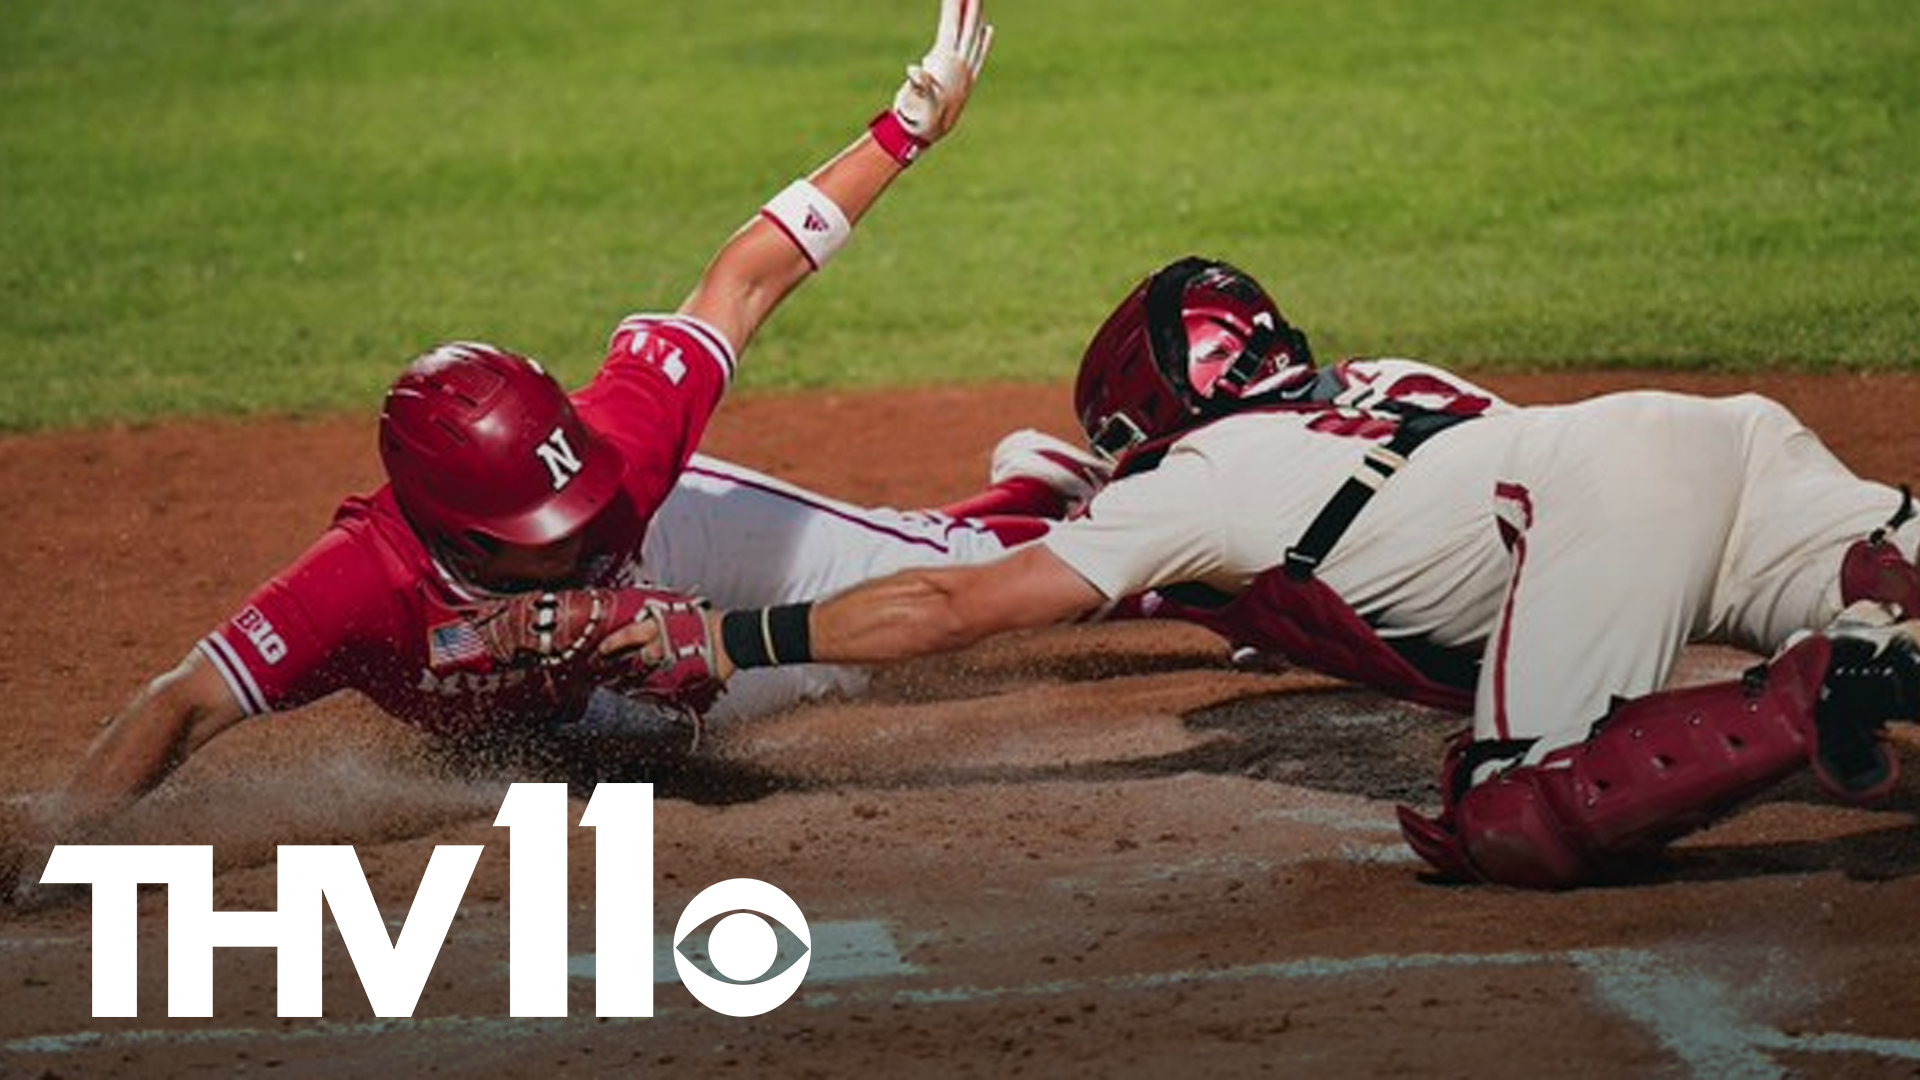 The Razorbacks were only able to muster four hits against Nebraska, who pounded out 10 hits and five runs against the Hogs